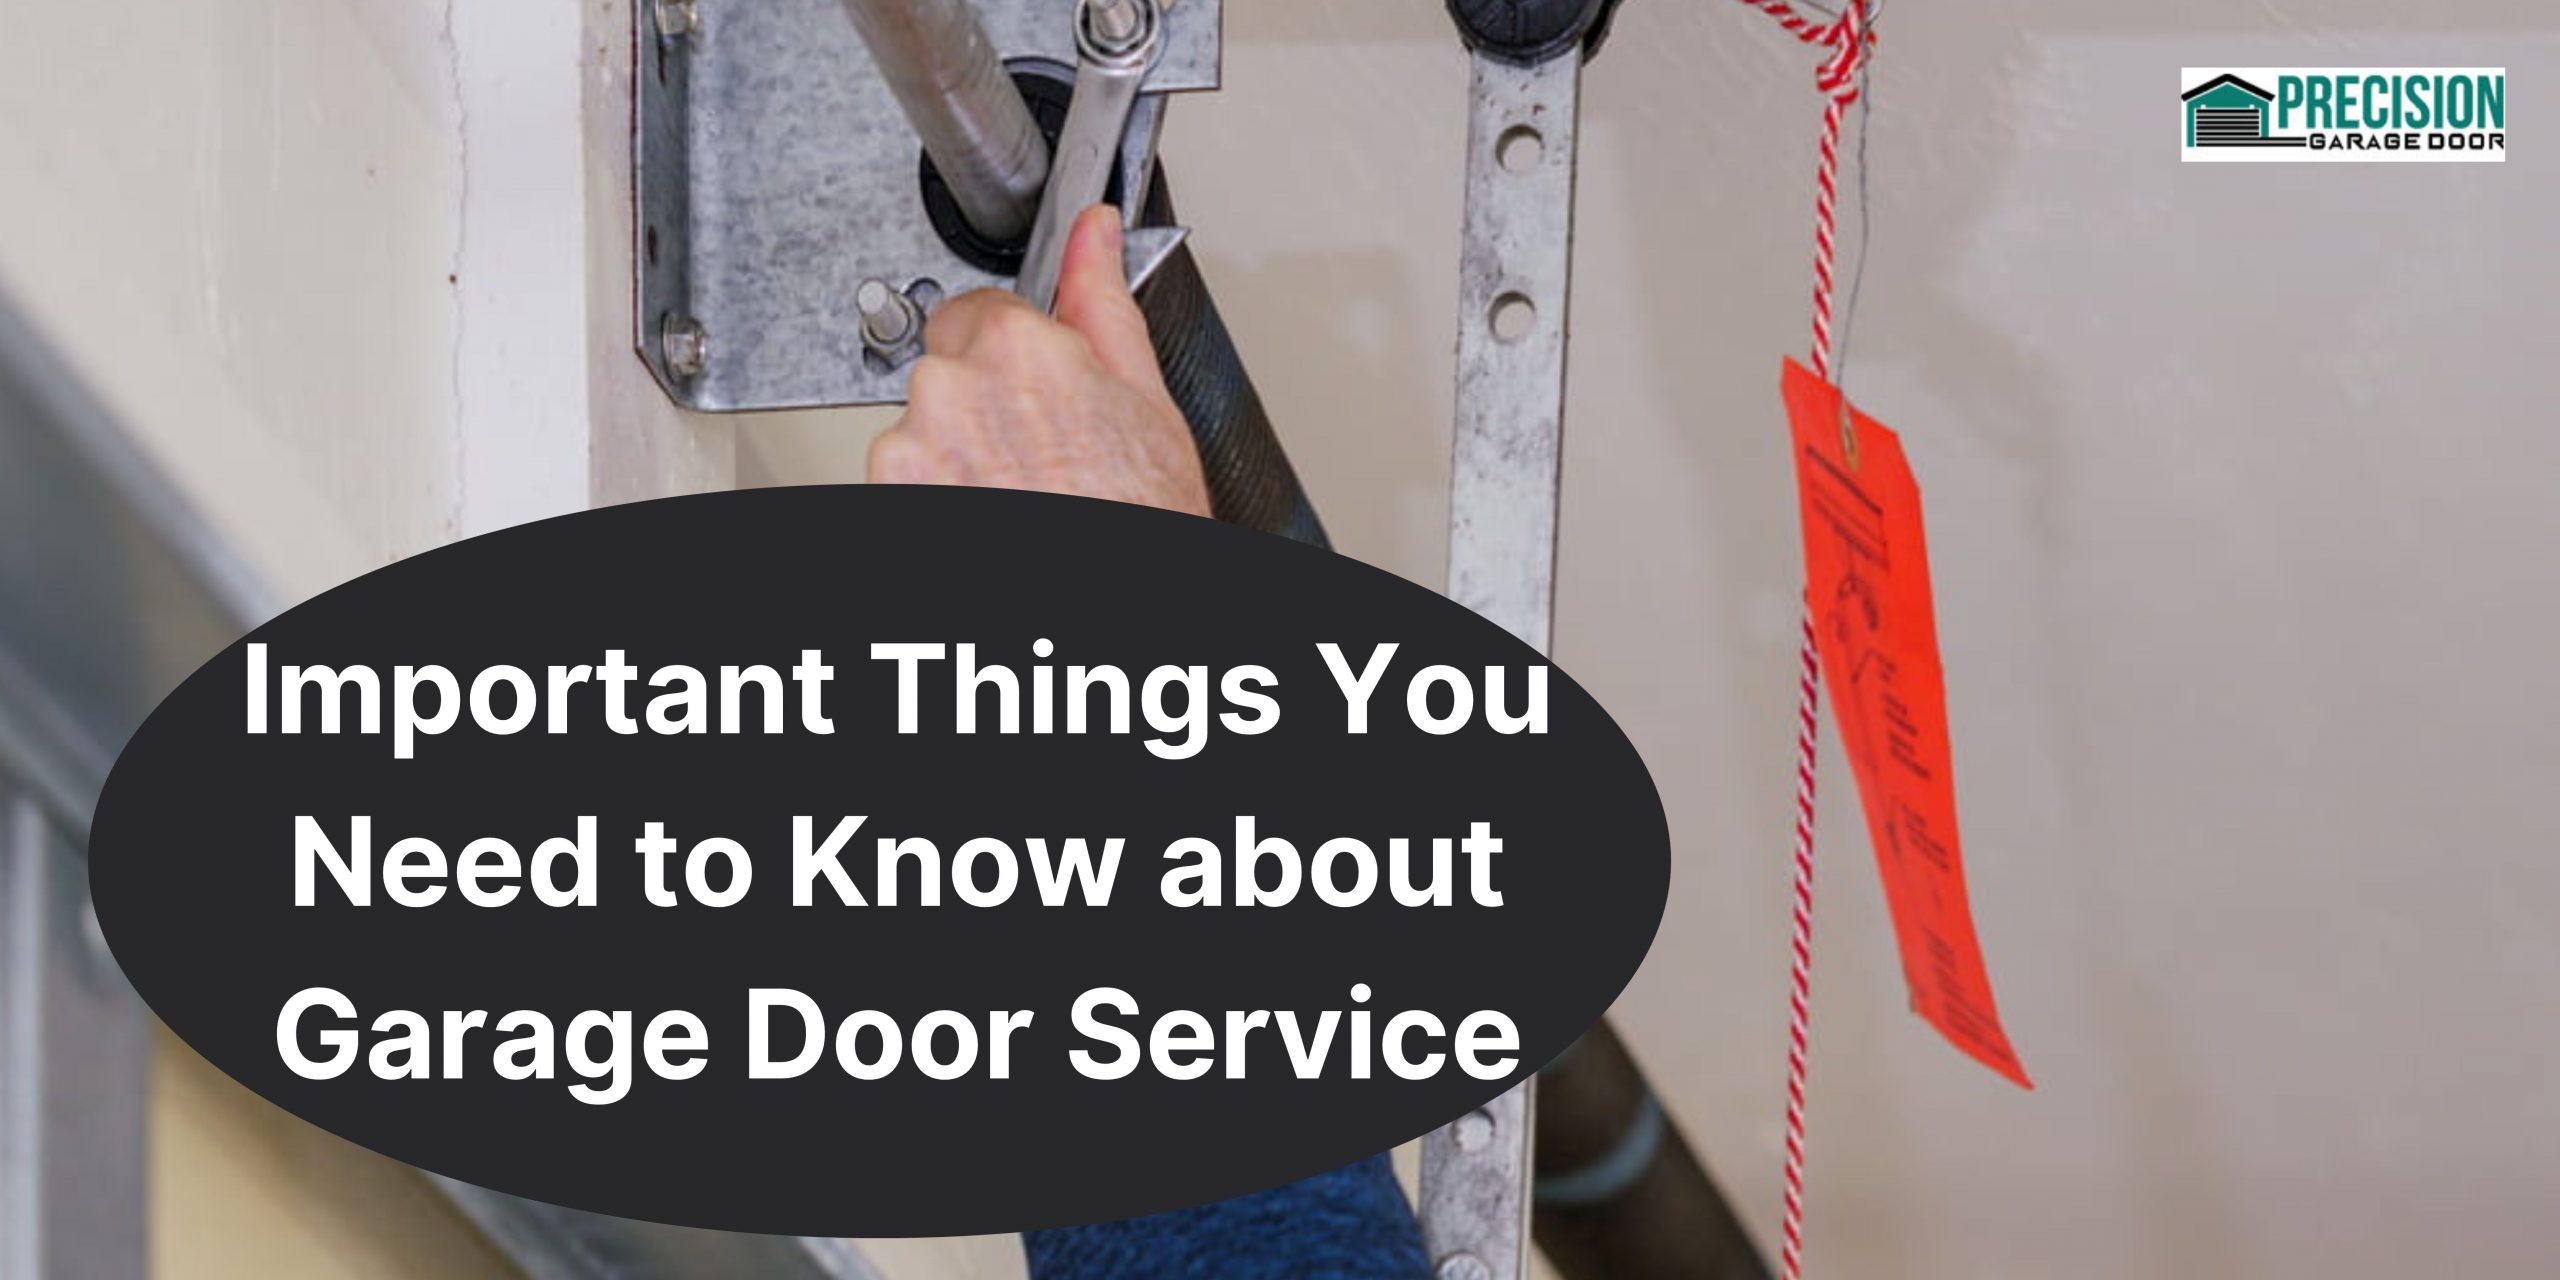 Important Things You Need to Know about Garage Door Service